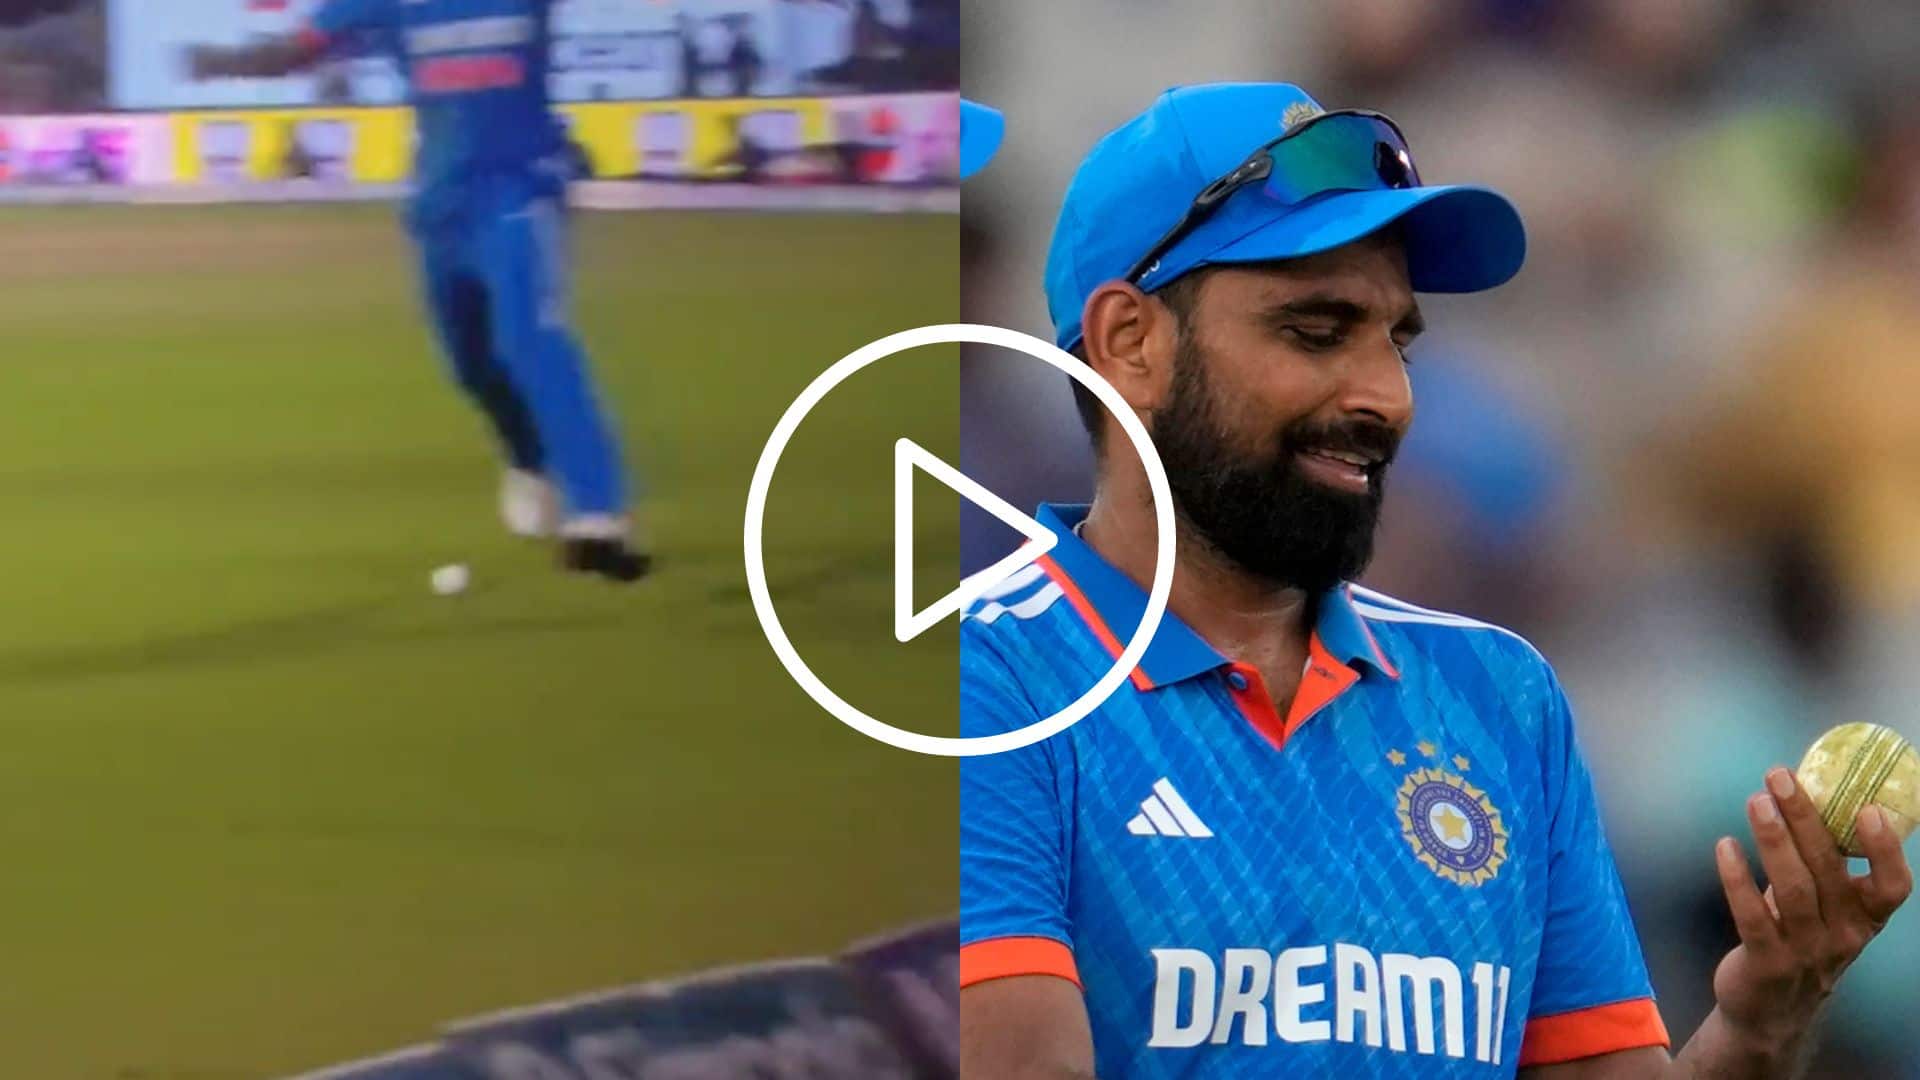 [Watch] Mohammed Shami Displays His Football Prowess With A Spectacular Boot Save